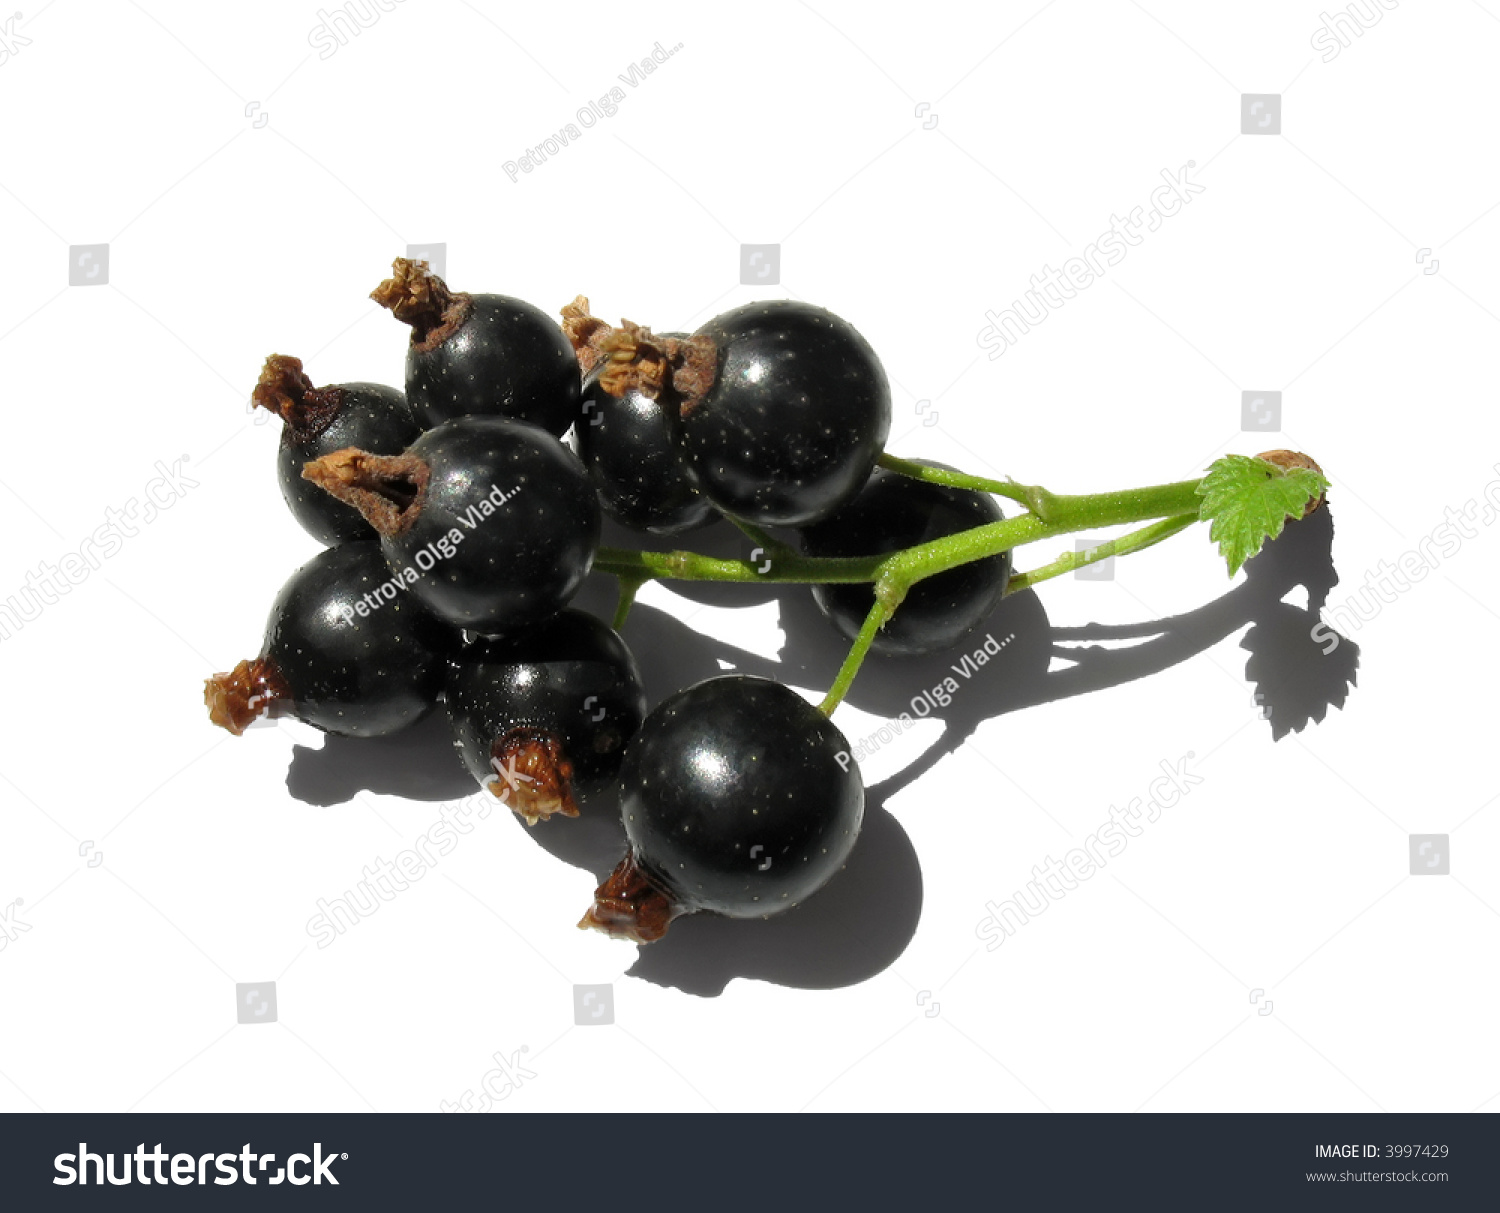 Berry Black Currant On White Background Stock Photo 3997429 - Shutterstock